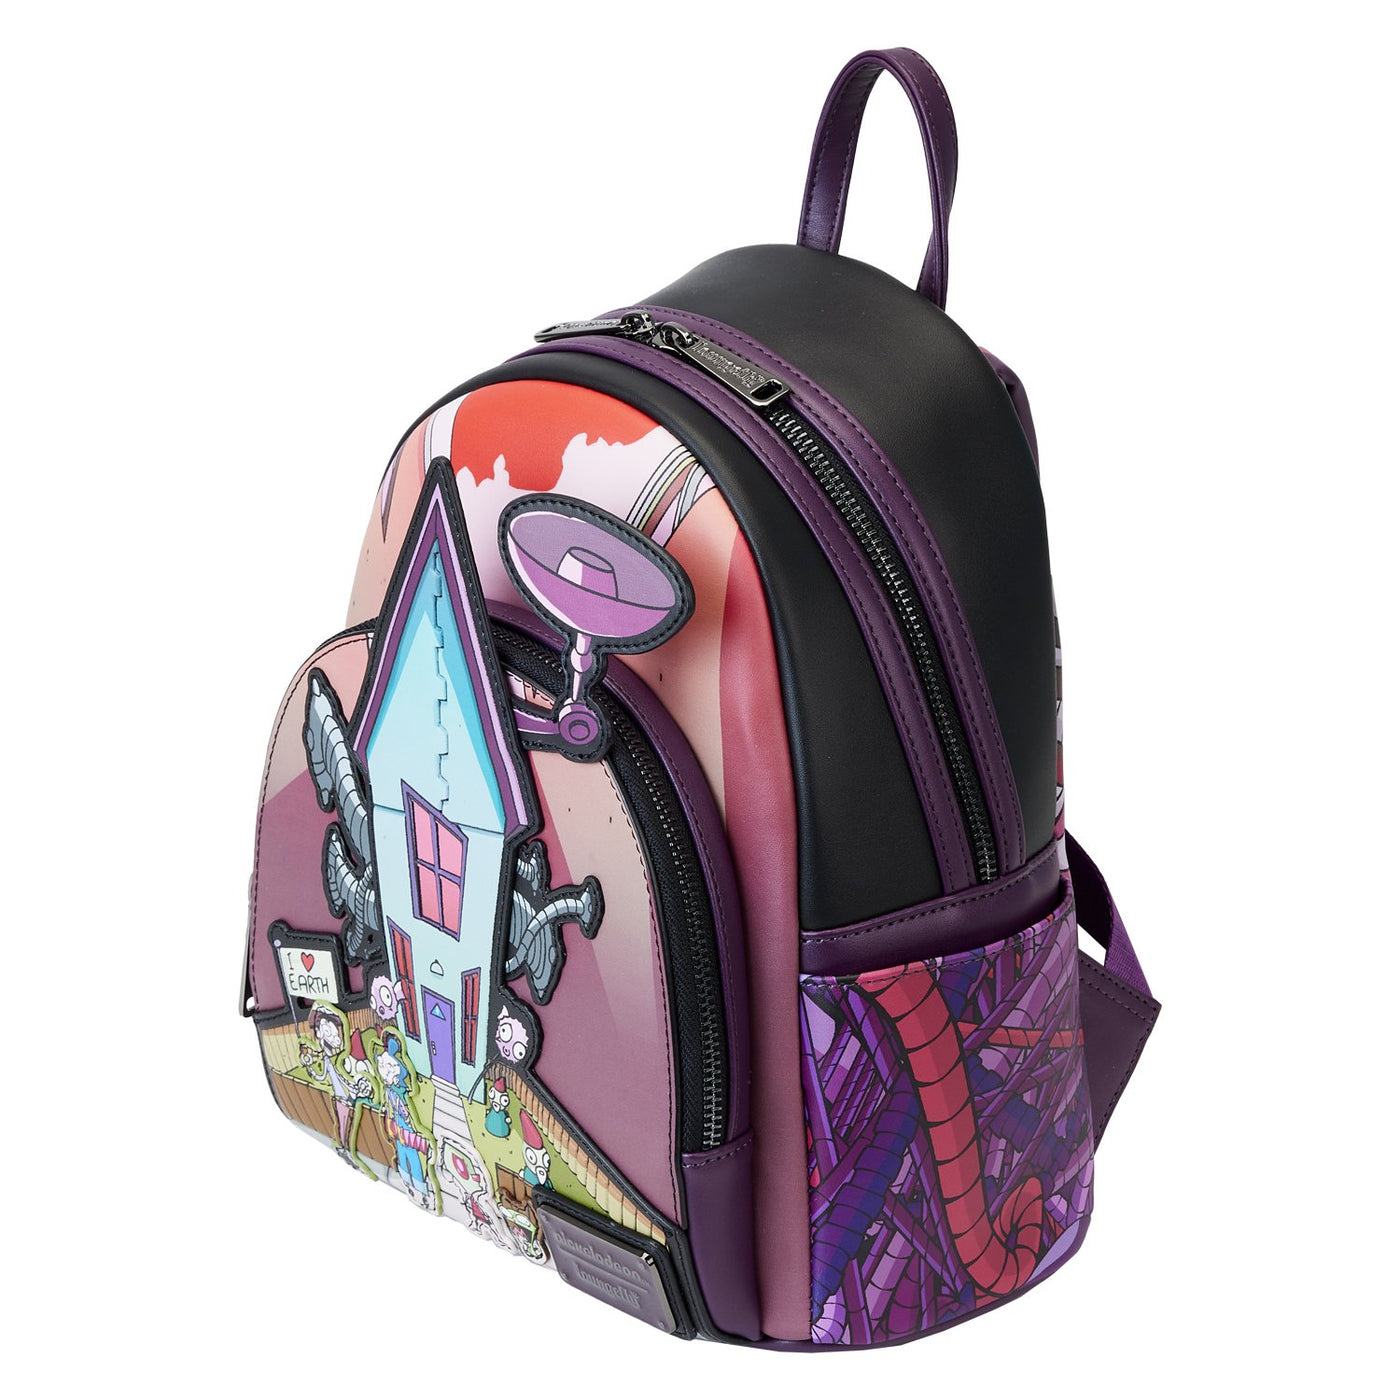 Loungefly Nickelodeon Invader Zim Secret Lair Mini Backpack - Top View